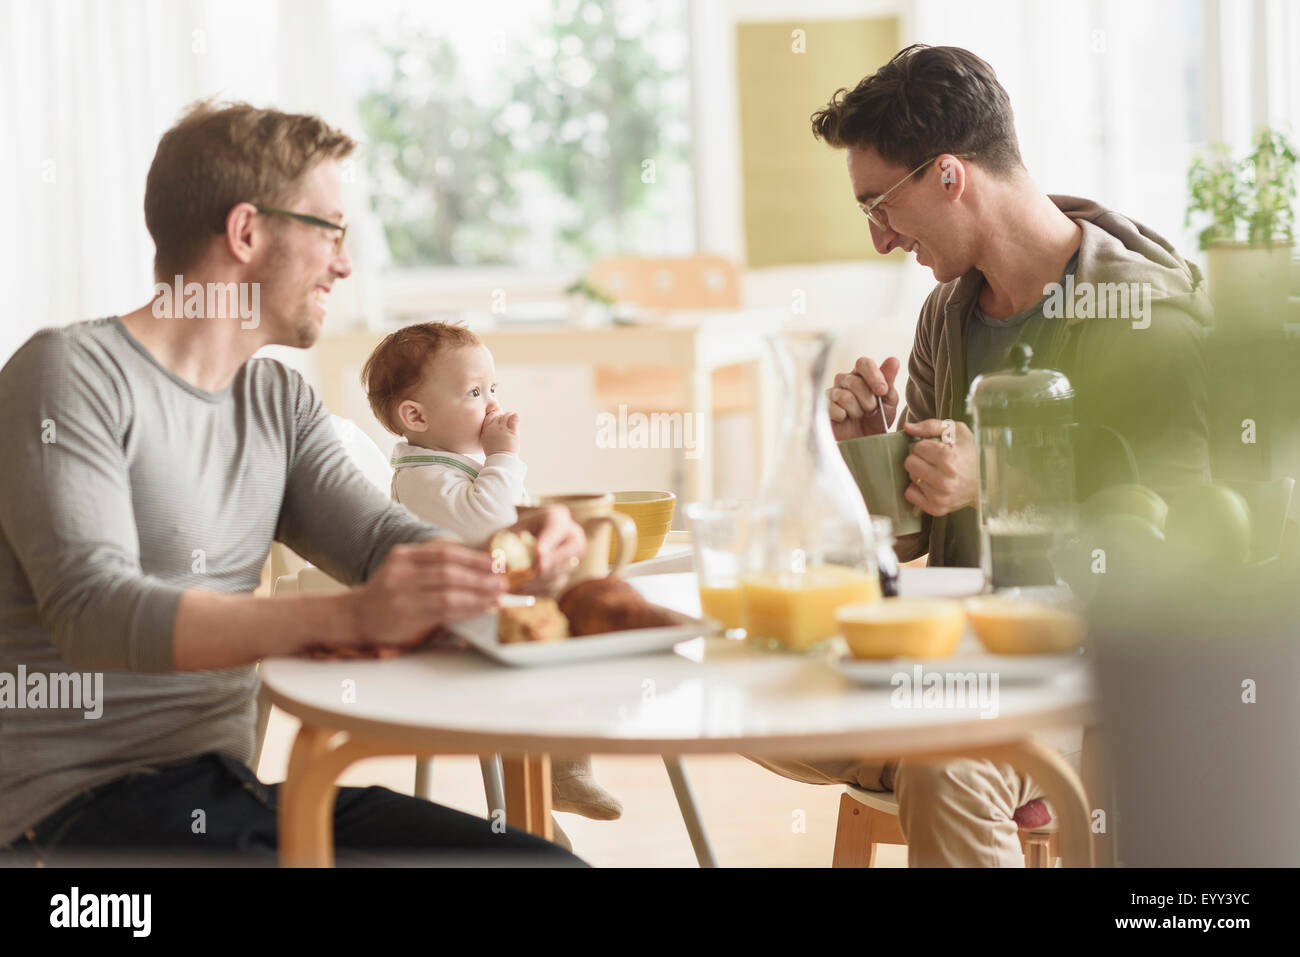 Caucasian gay fathers and baby eating breakfast Stock Photo